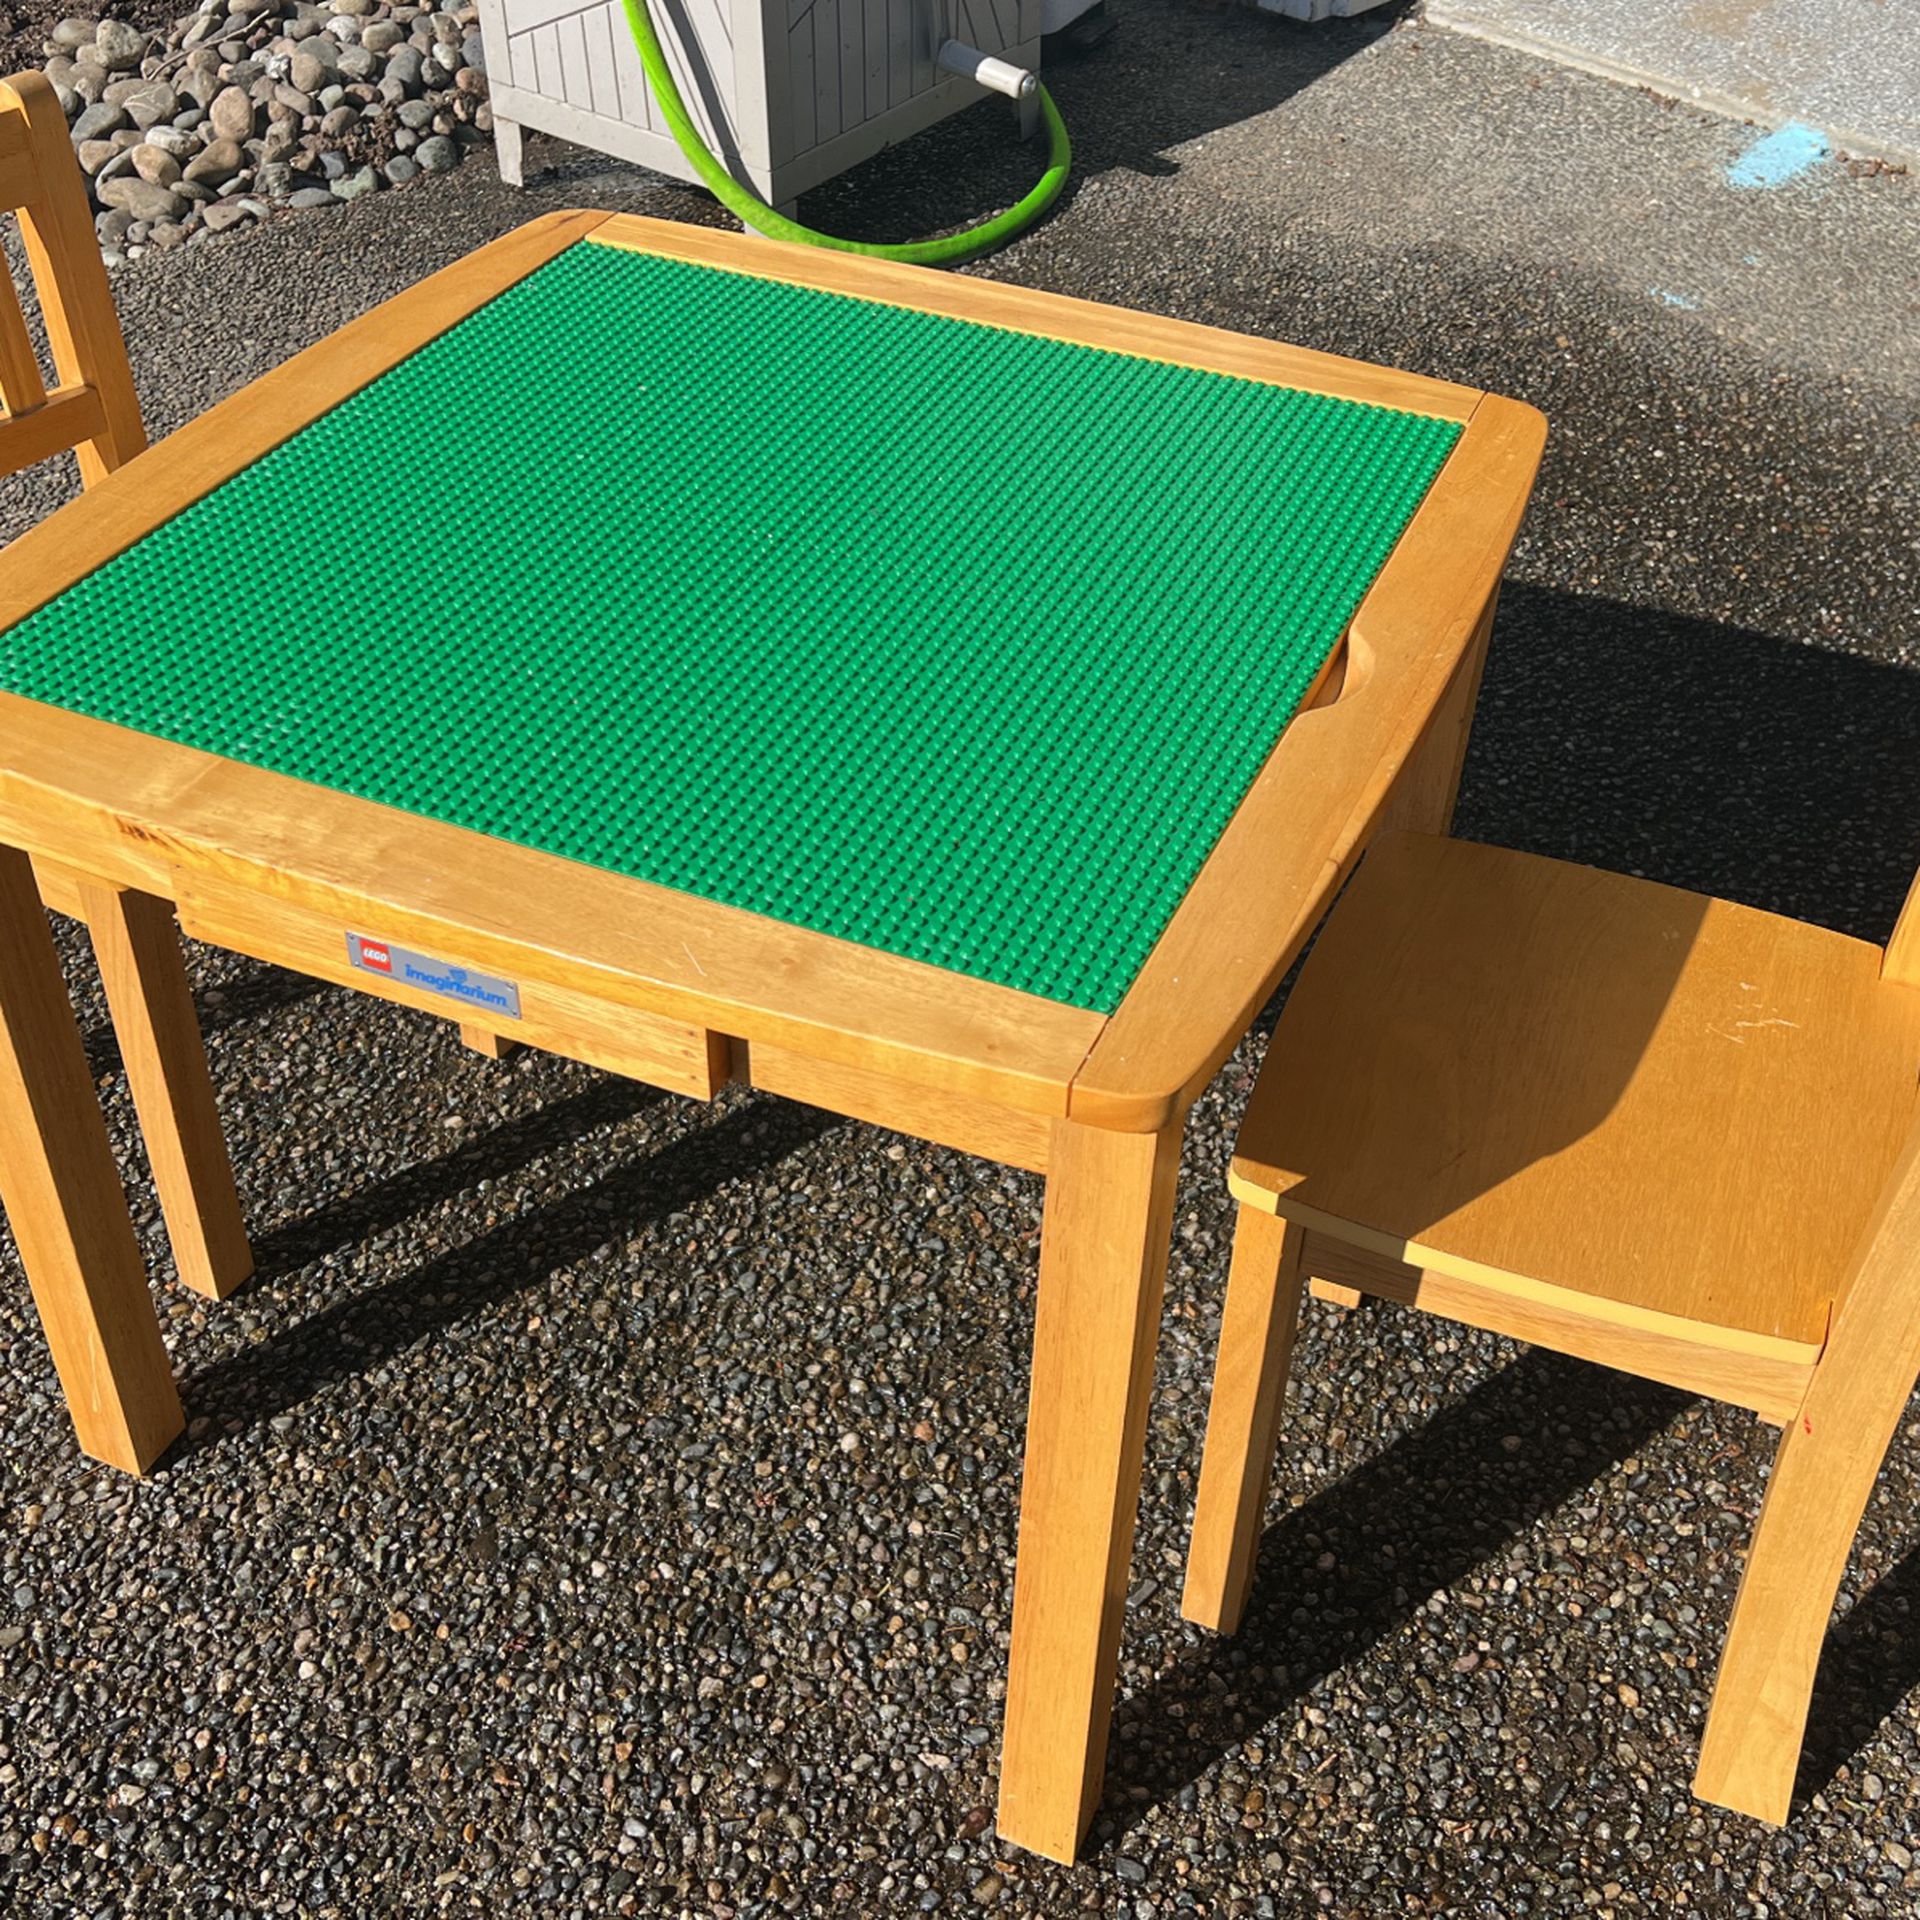 Kid’s Lego Table -Reversible (Solid Wood)